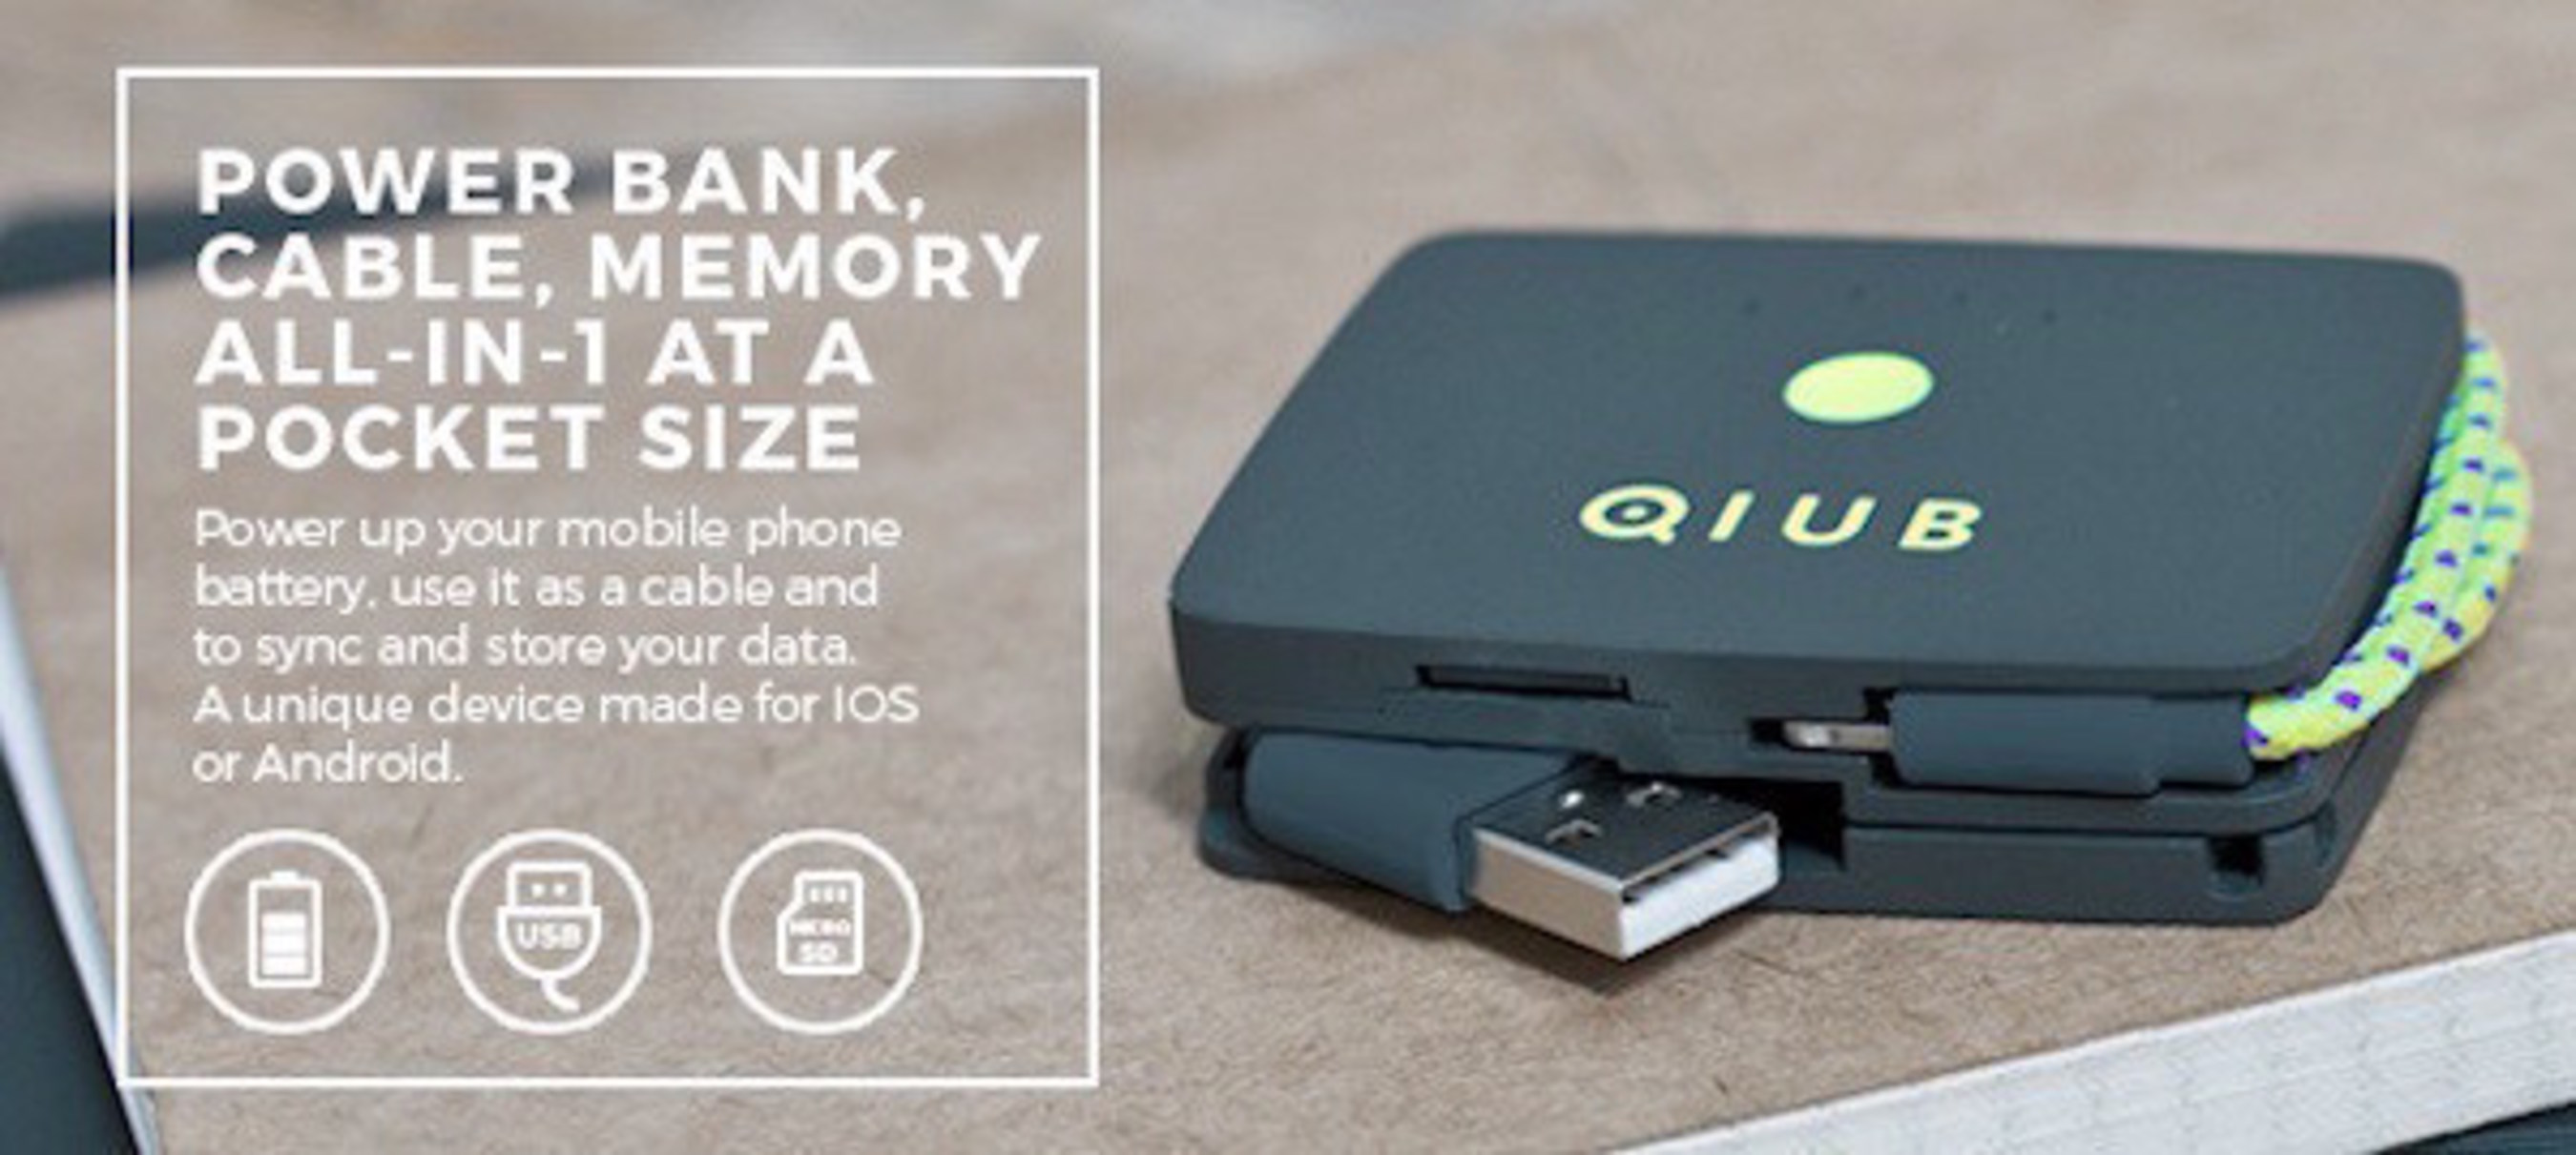 Compared to regular power banks, QIUB is a multi functional device with an integrated cable and memory card reader that replaces the need to carry multiple phone accessories. QIUBcan read any Micro-SD card up to 64GB and is compatible with any laptop. QIUB is also perfect place to keep safe your Micro-SD memory card.